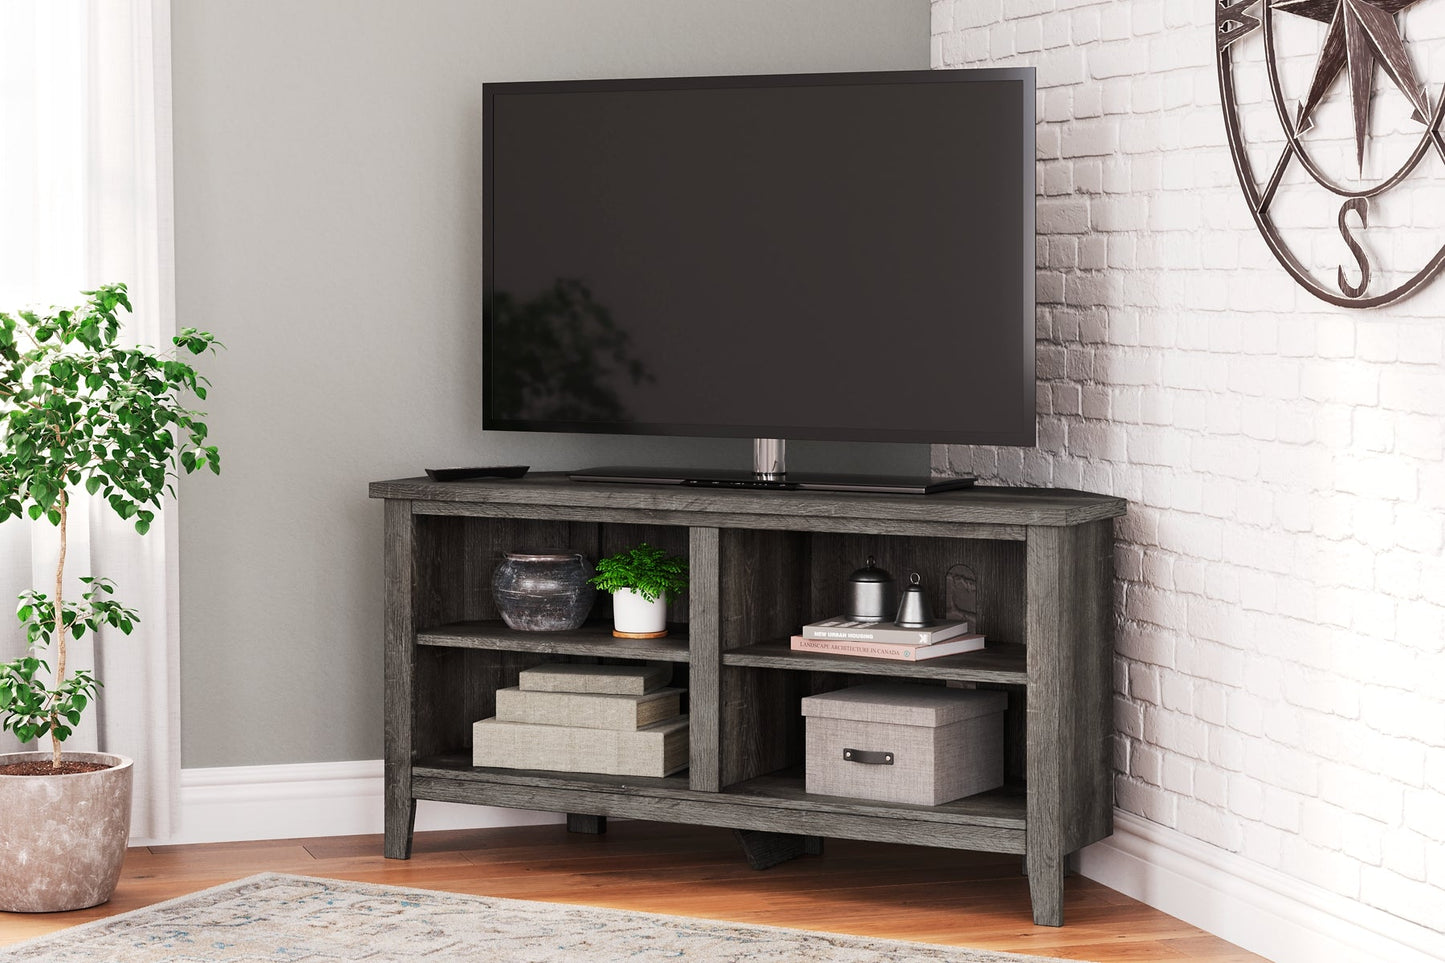 Arlenbry Small Corner TV Stand Rent Wise Rent To Own Jacksonville, Florida